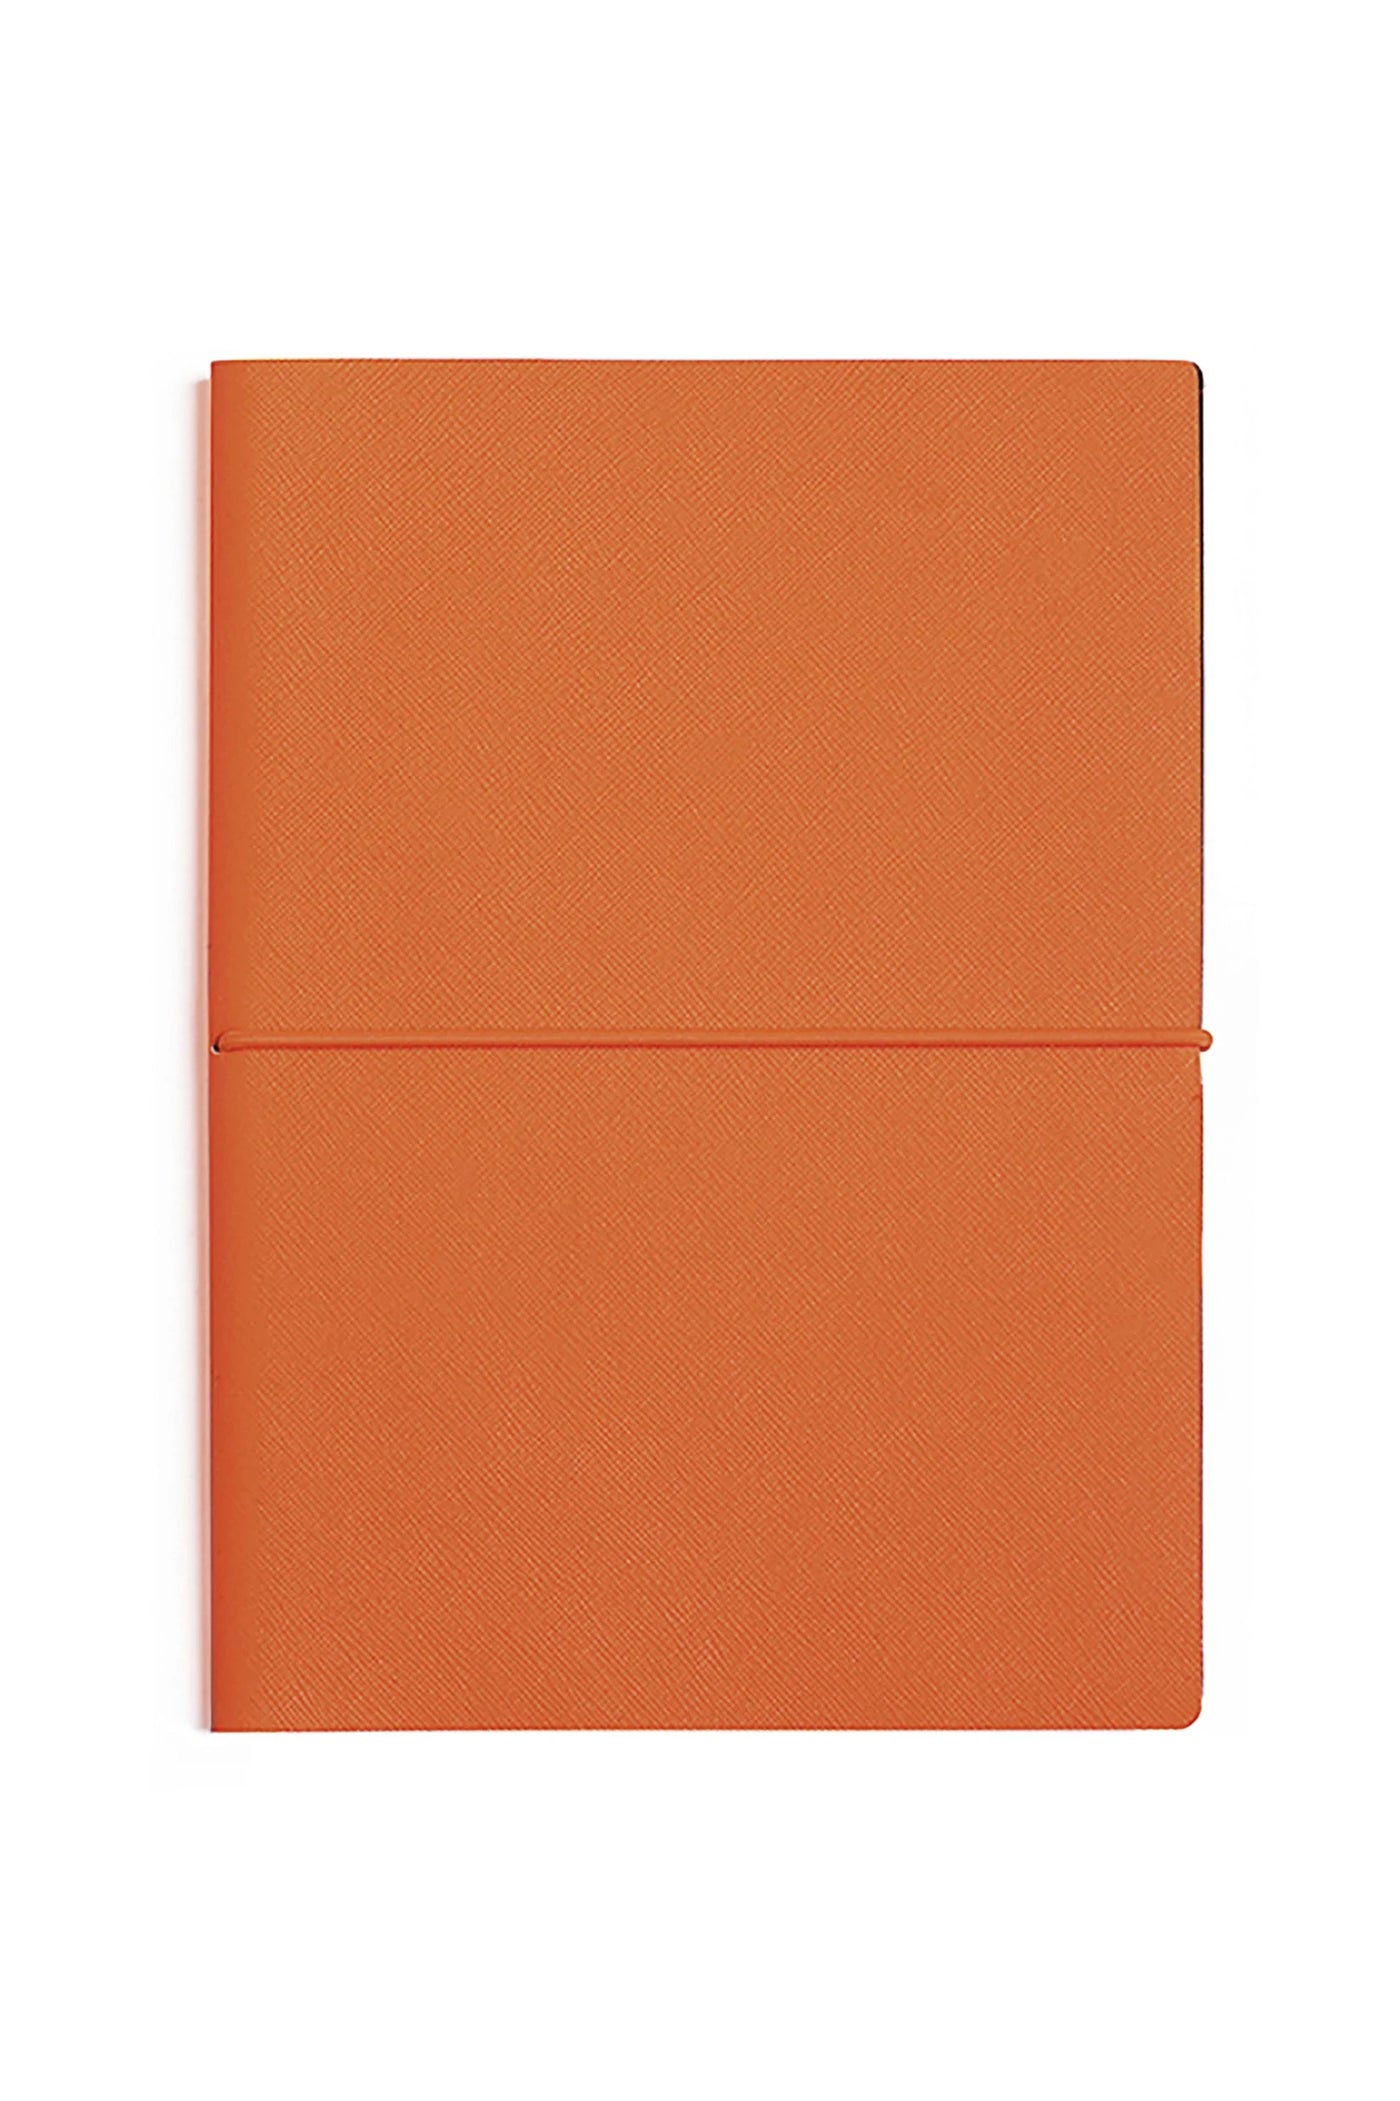 B6 Neon Textured Notebook Lined